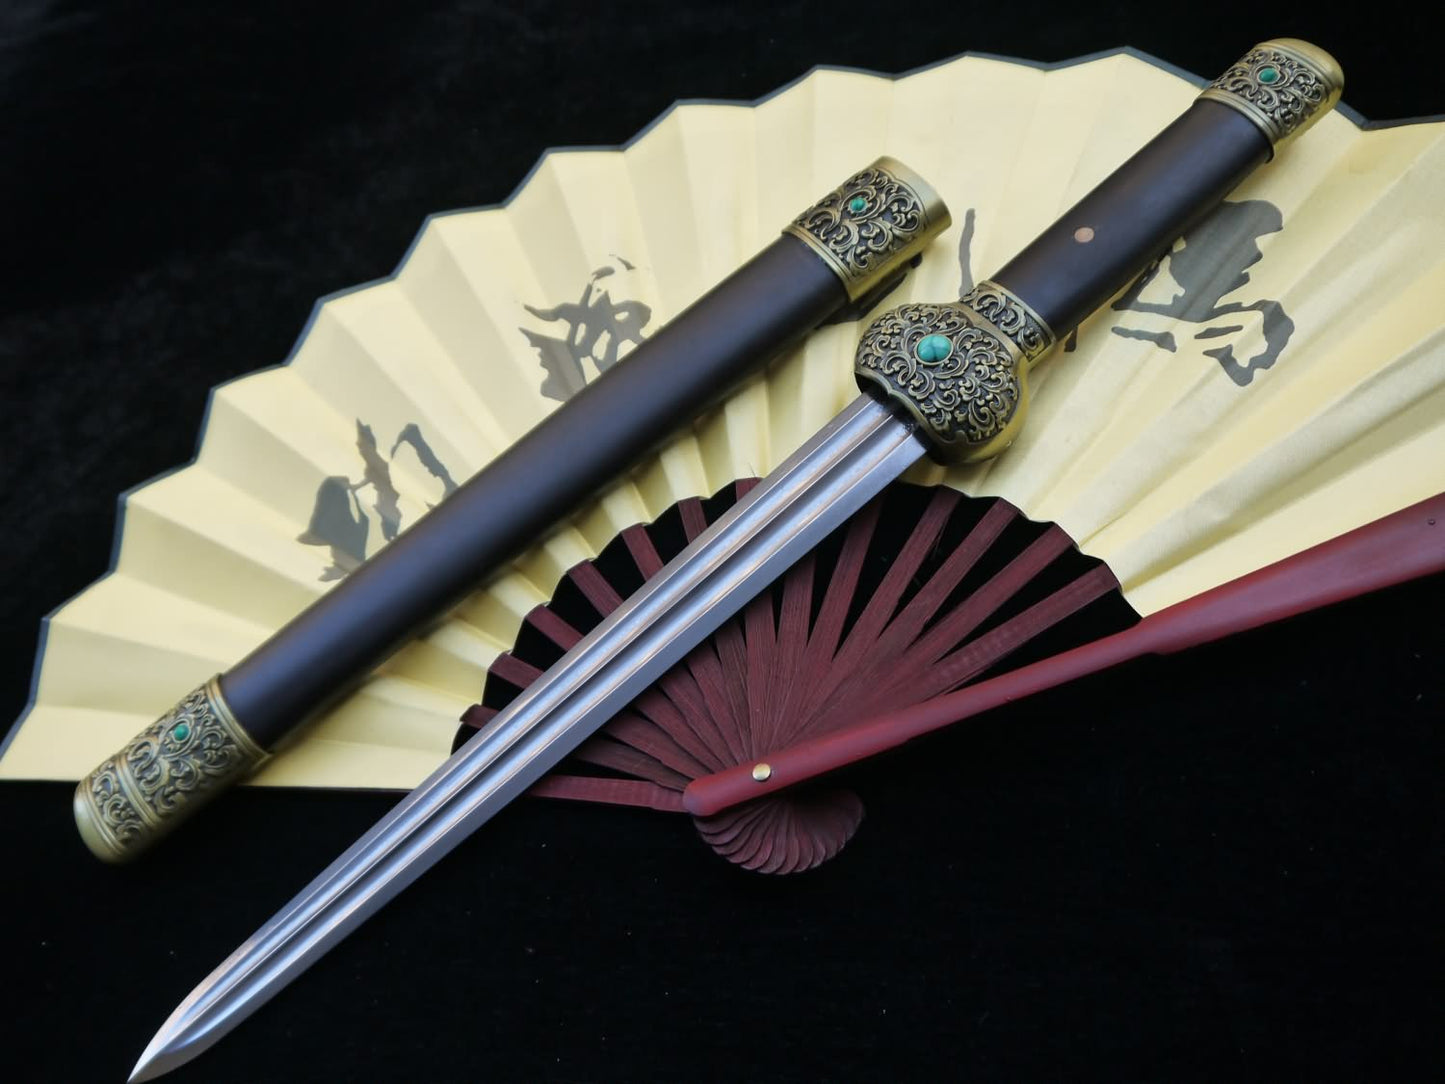 Whinger,Dagger,Folding steel,Black wood scabbard,Alloy fitting - Chinese sword shop